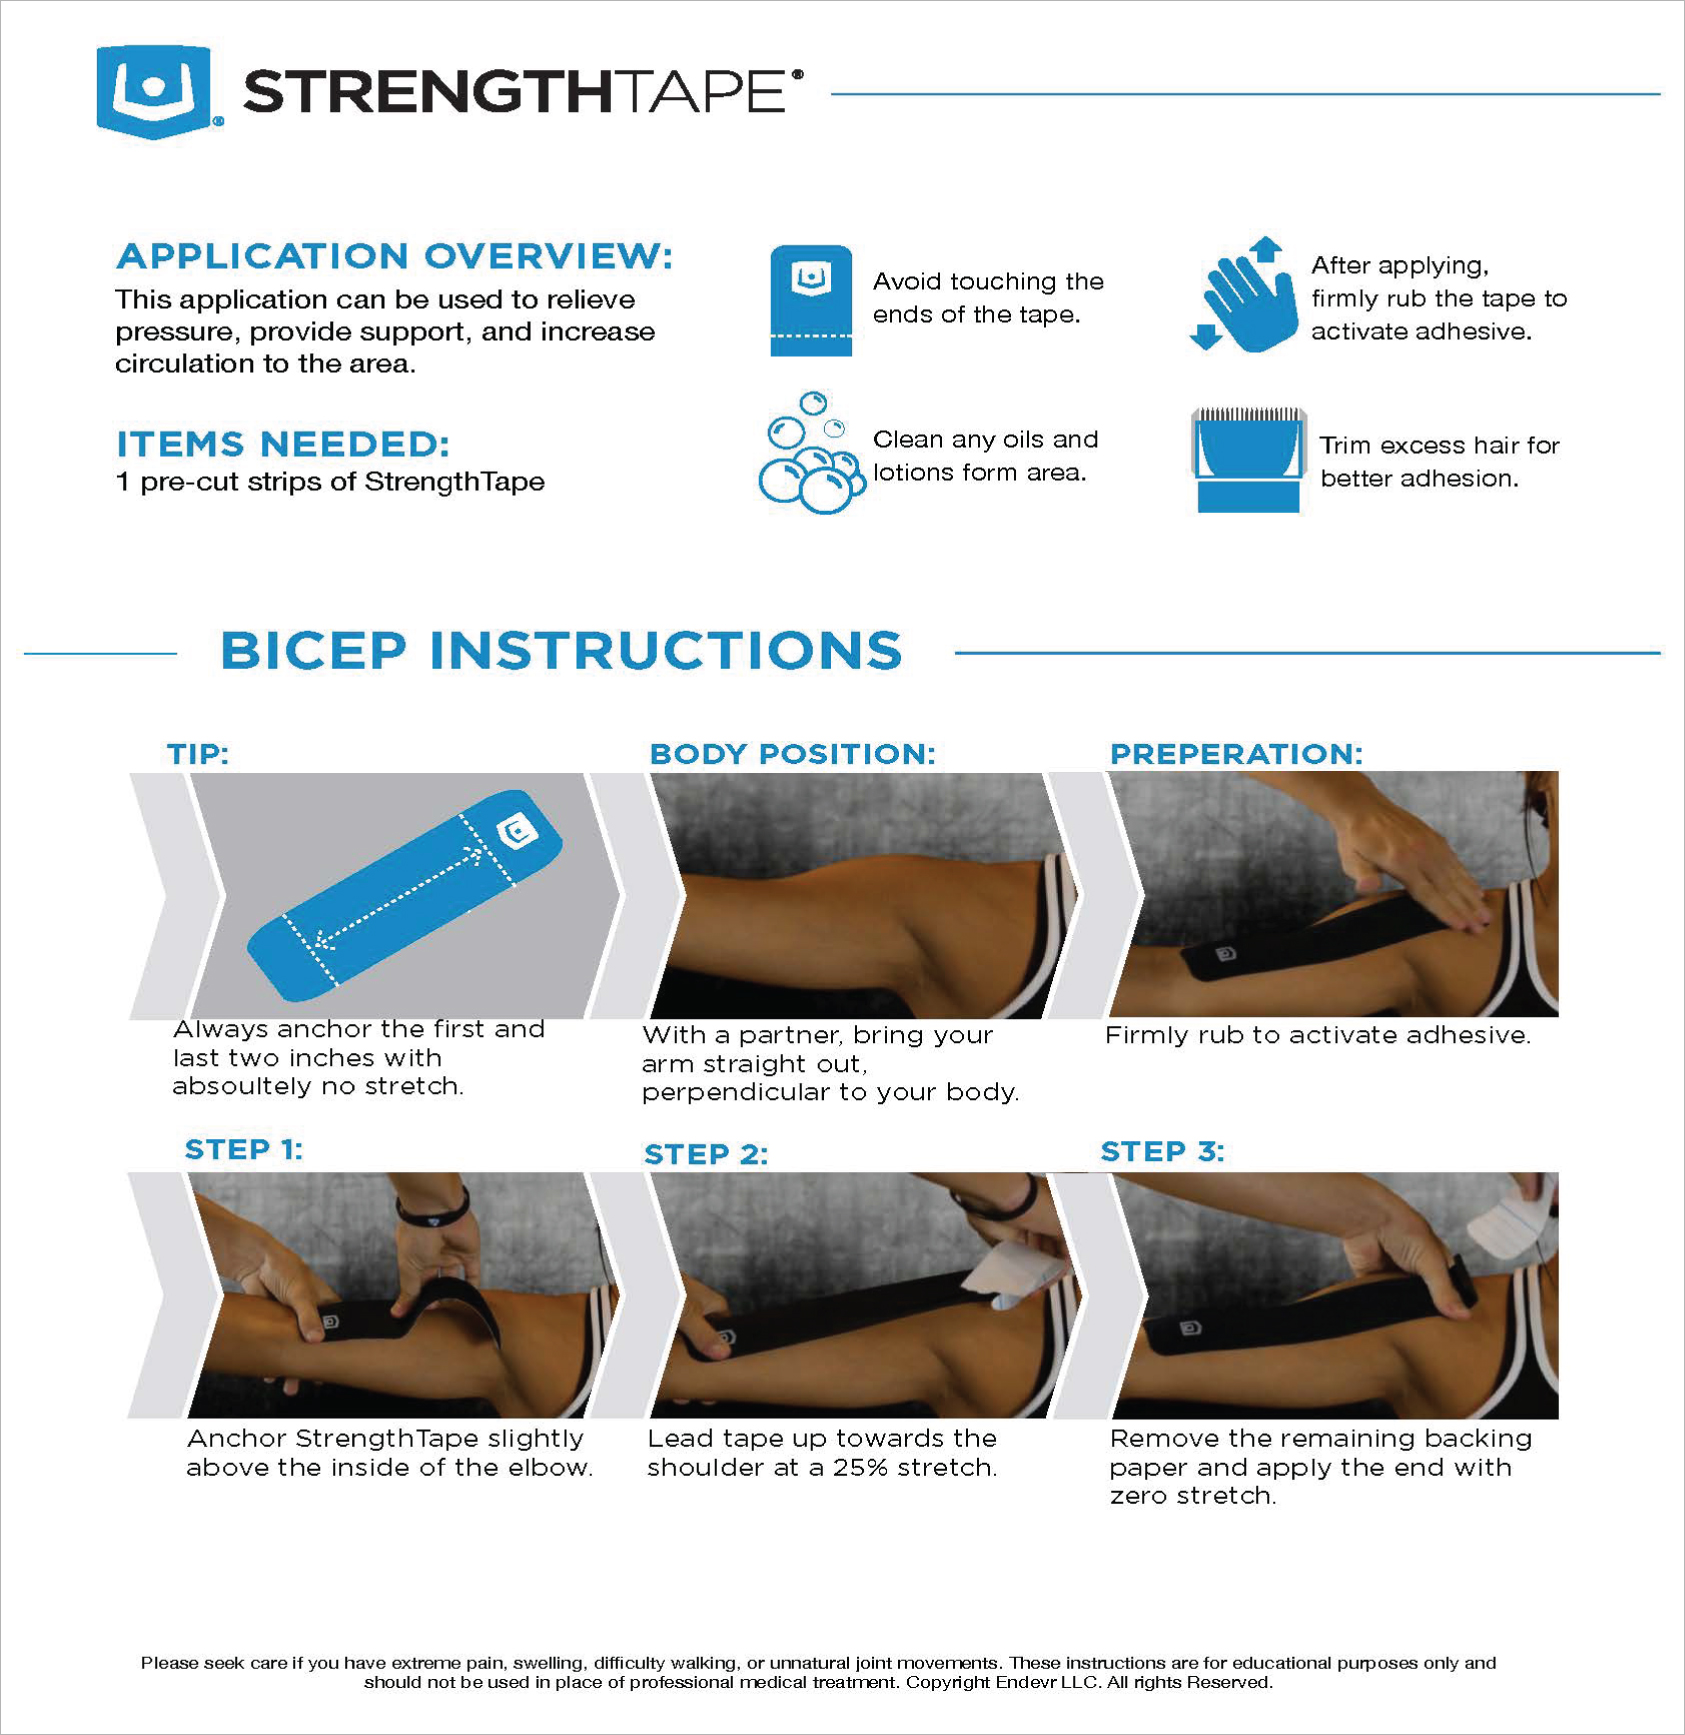 StrengthTape Bicep Taping Instructions